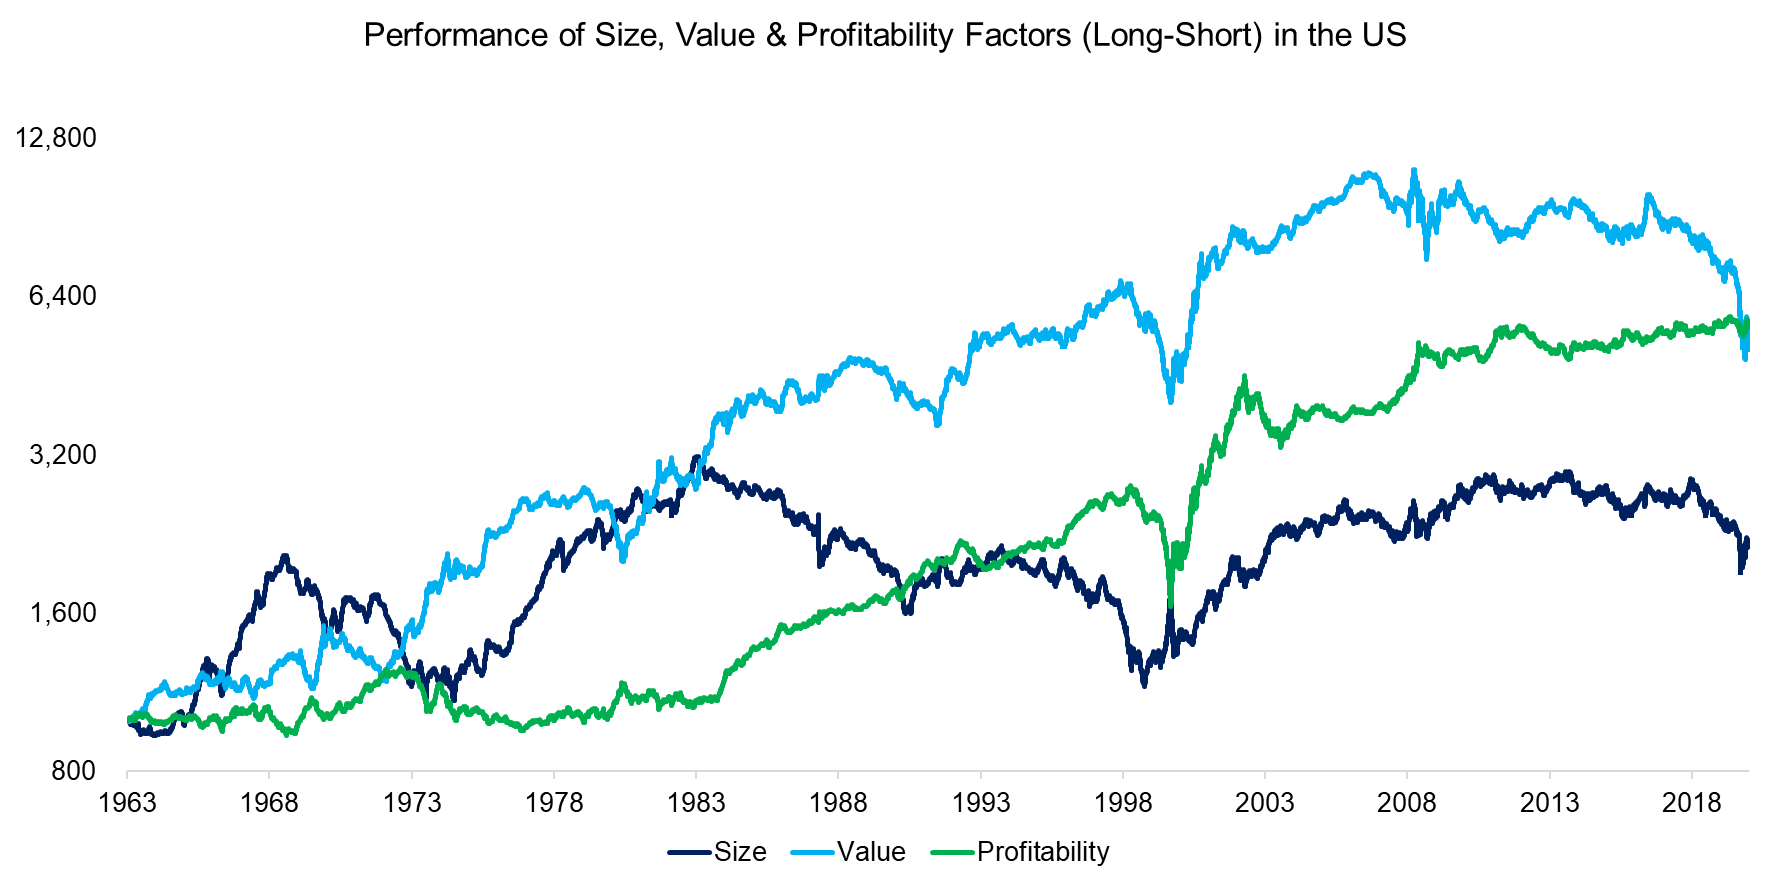 Performance of Size, Value & Profitability Factors (Long-Short) in the US